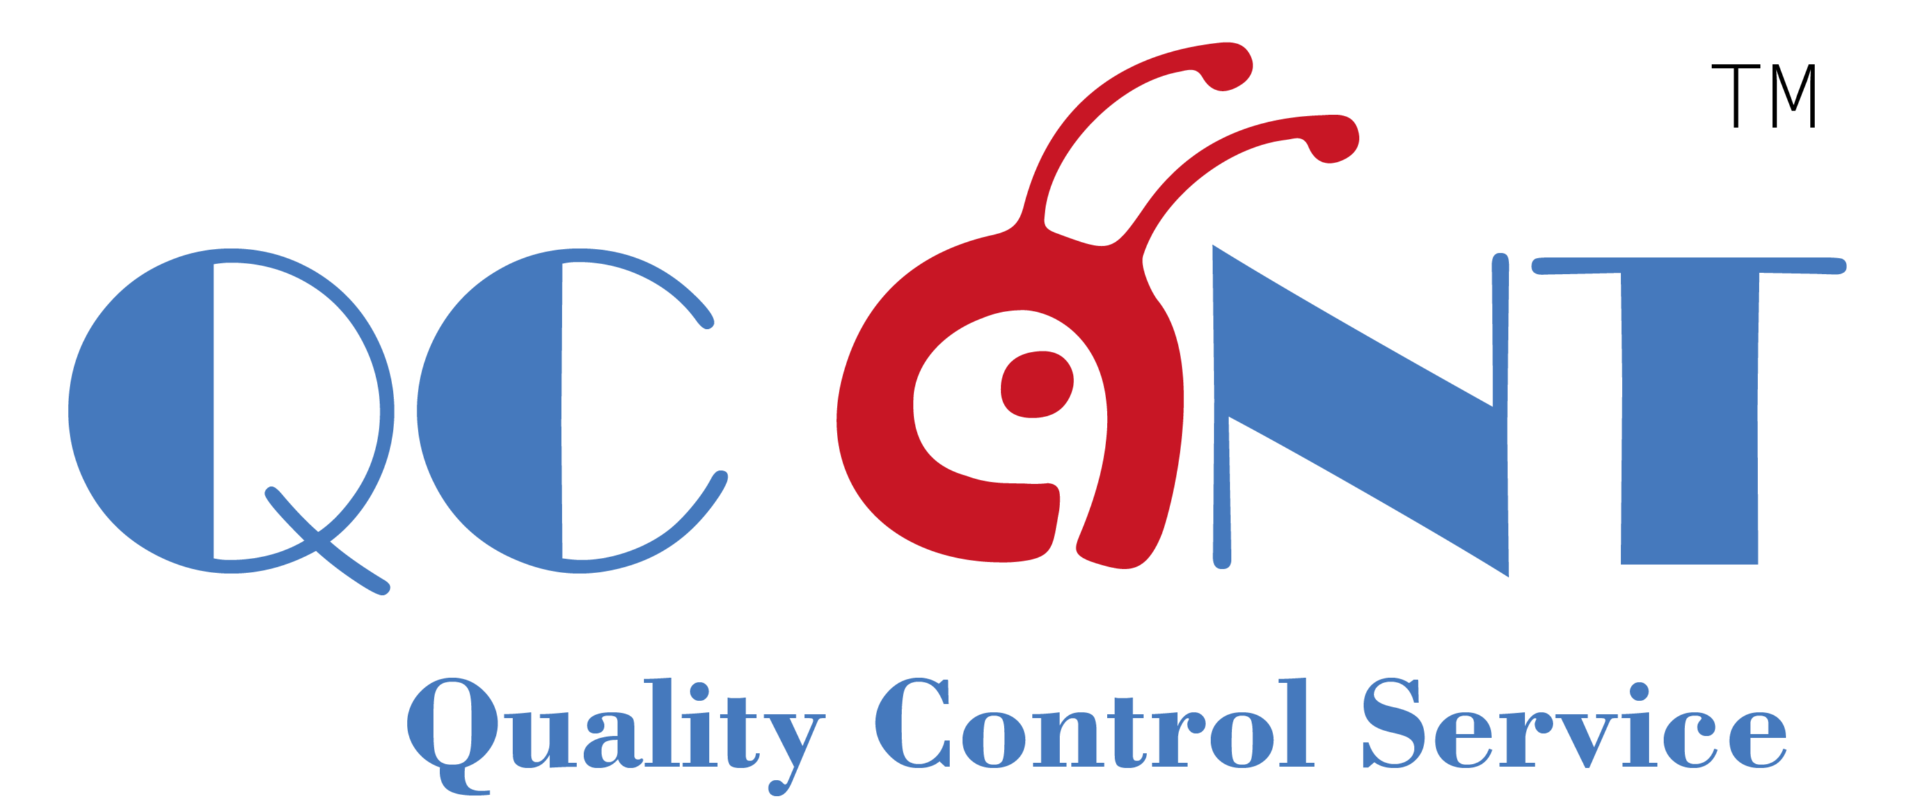 QCANT™ Provide Innovative Quality Control Solutions - Booking Now!